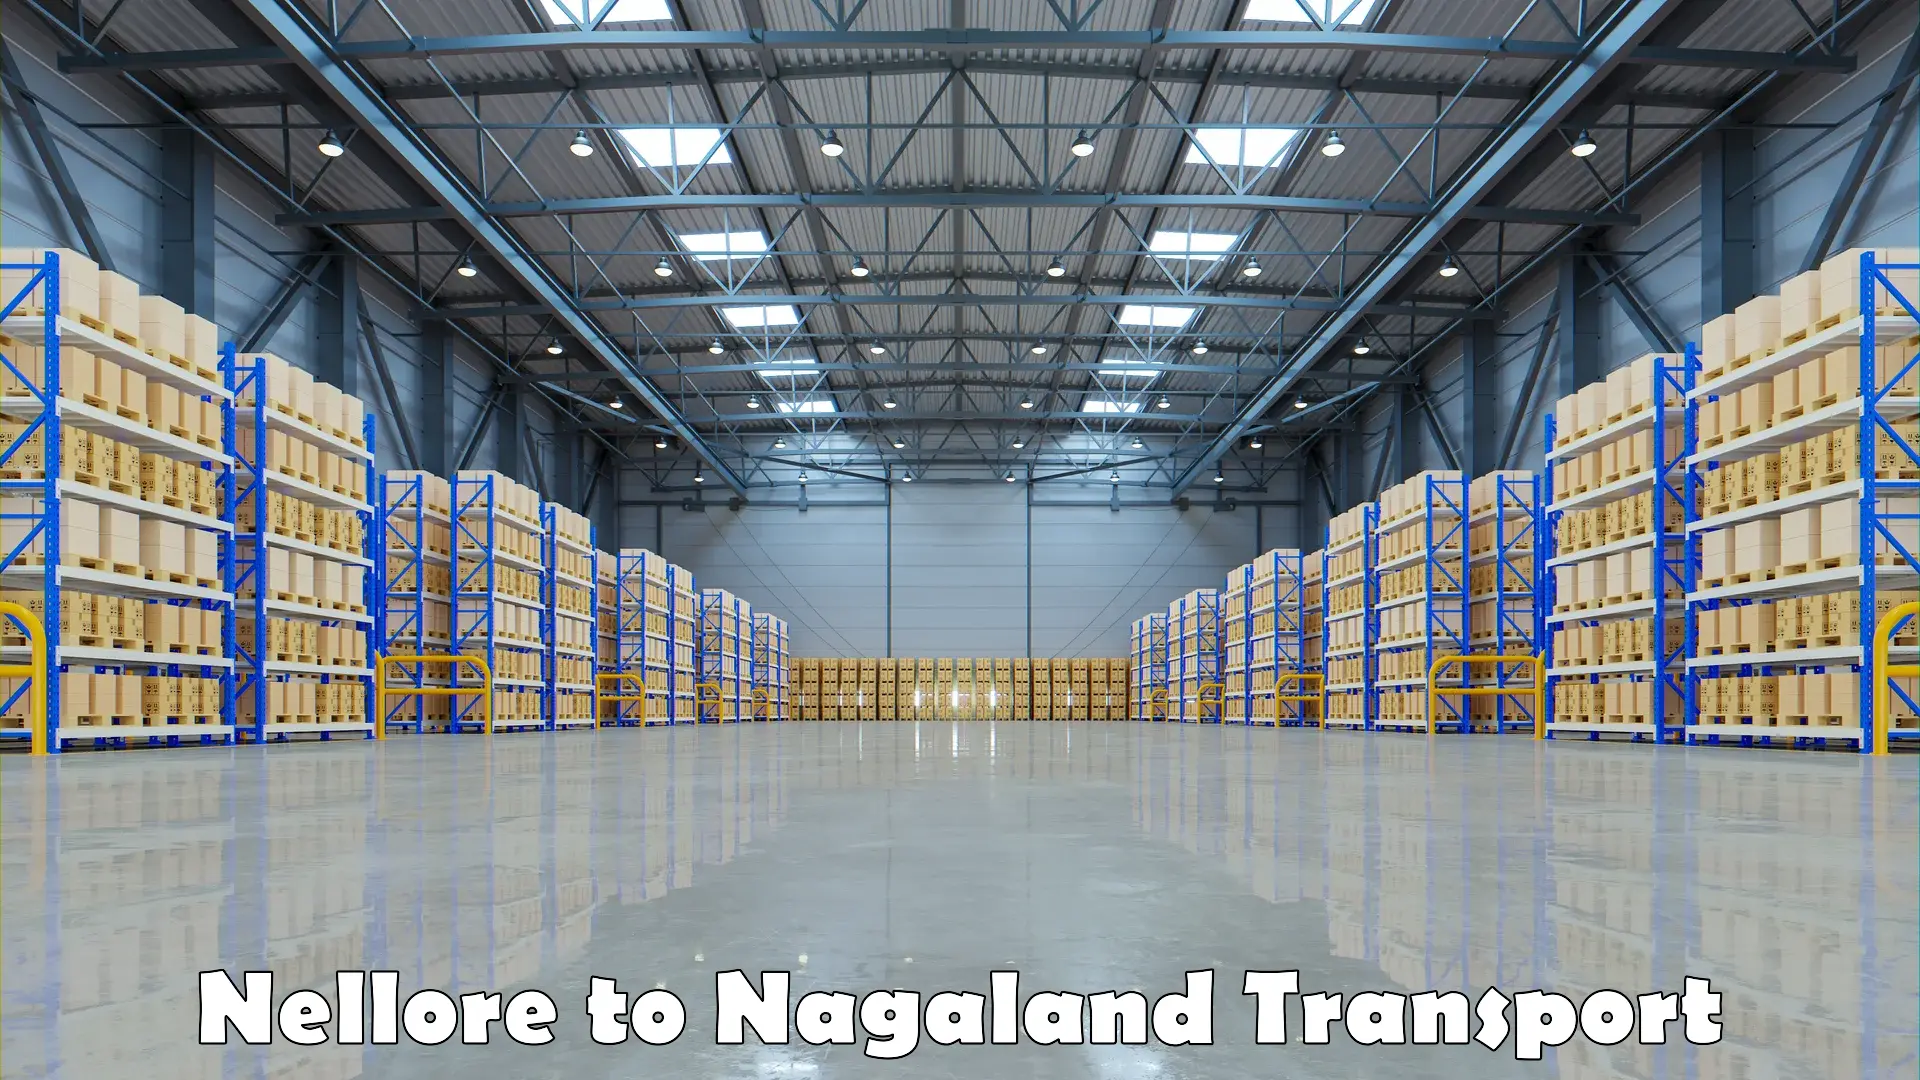 Daily transport service Nellore to Nagaland